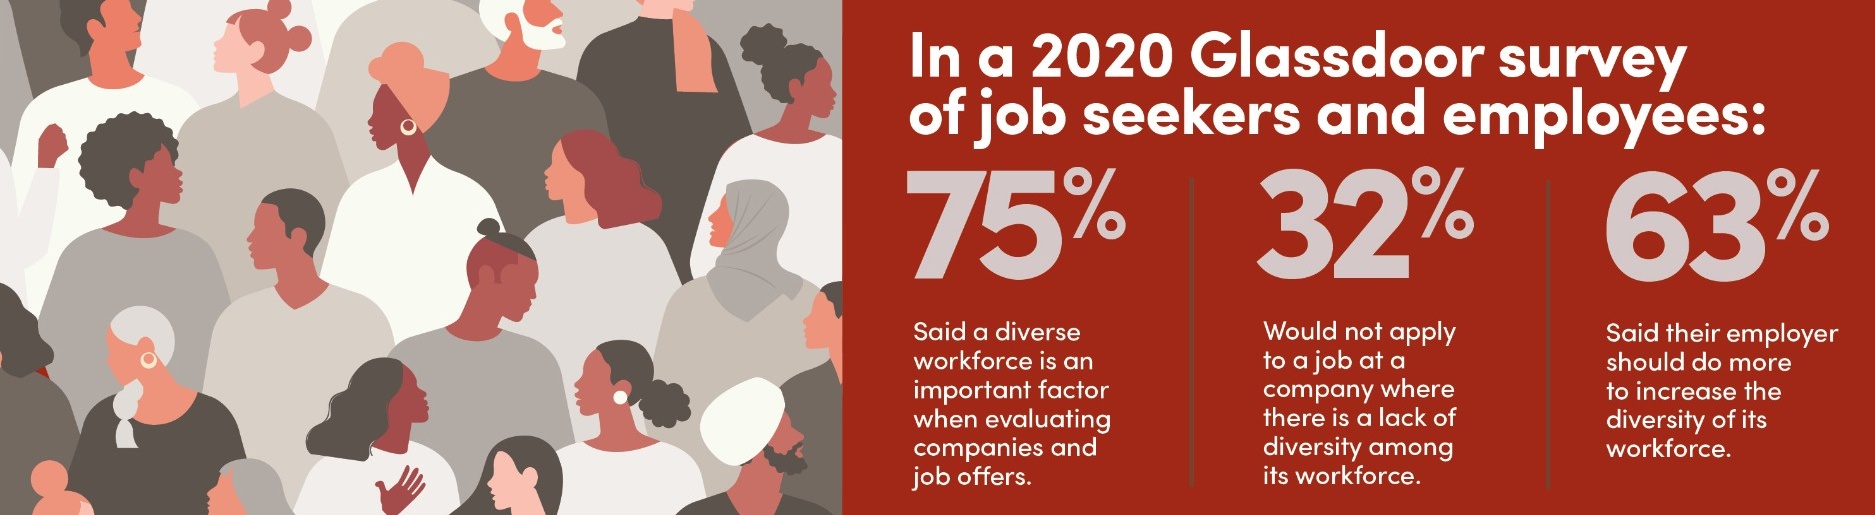 Zoom image: Infographic about a 2020 survey that found: 75% of job seekers and employees say a diverse workforce is an important factor when evaluating job offers; 32% would not apply to a company with a lack of diversity; and 63% say their employer should do more to increase the diversity of its workforce.